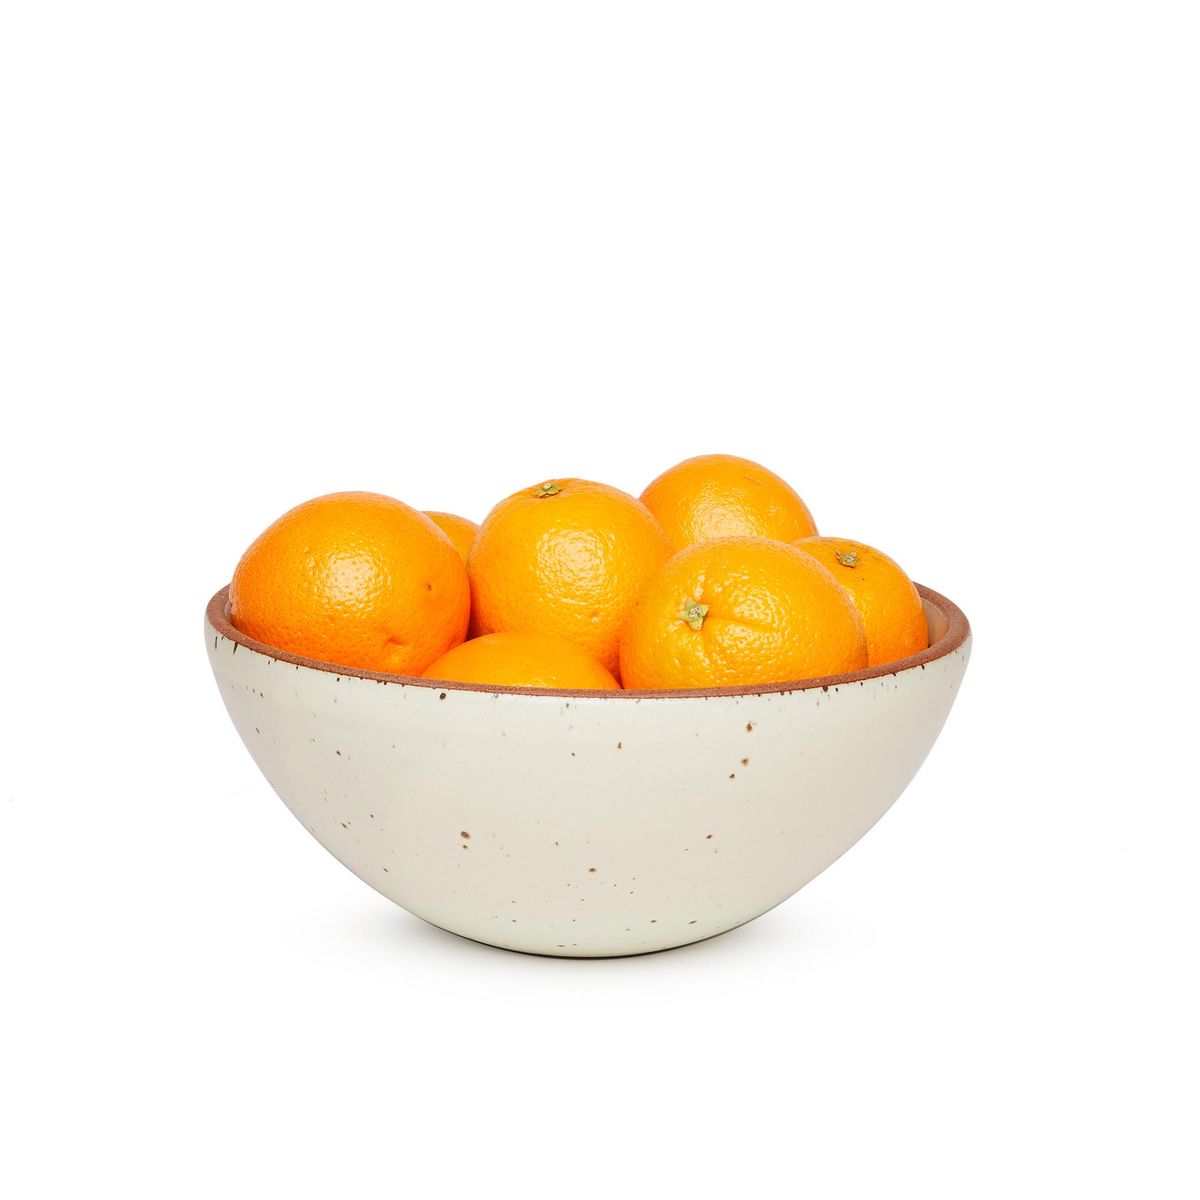 A large rounded ceramic bowl in a warm, tan-toned, off-white color featuring iron speckles and an unglazed rim, filled with oranges